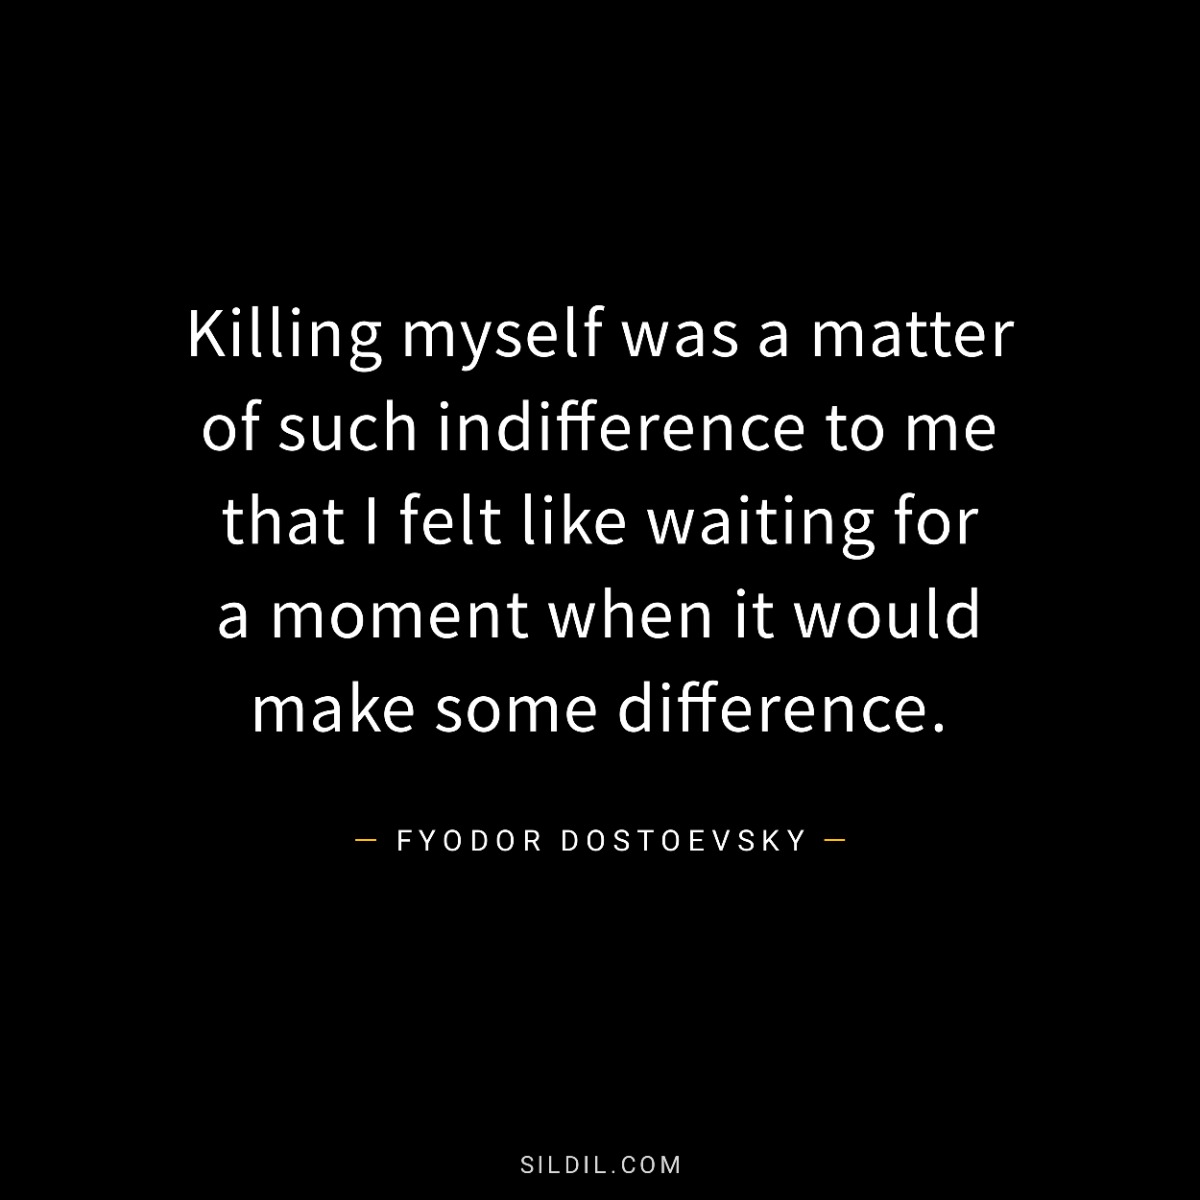 Killing myself was a matter of such indifference to me that I felt like waiting for a moment when it would make some difference.